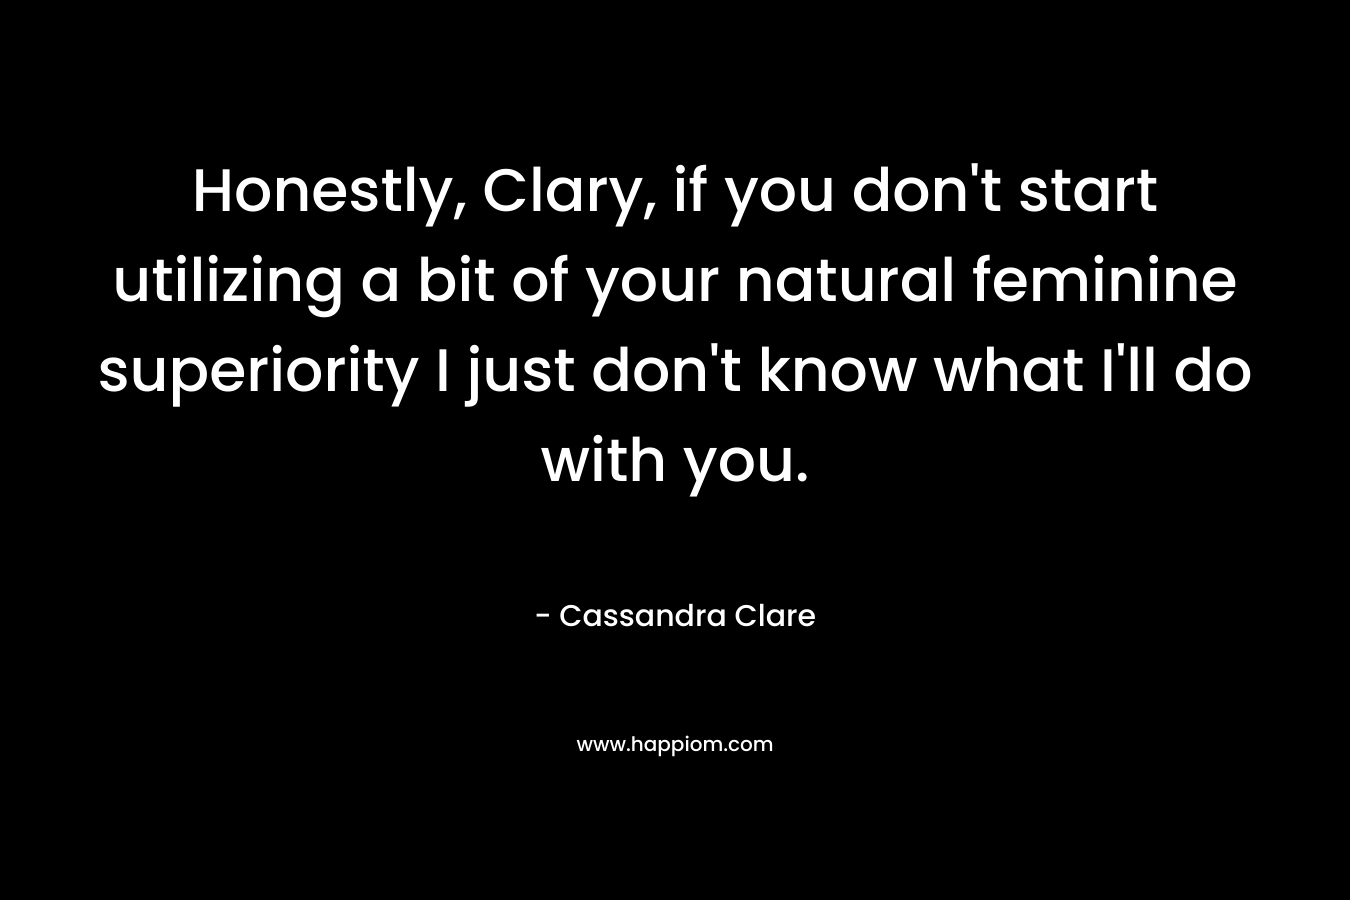 Honestly, Clary, if you don't start utilizing a bit of your natural feminine superiority I just don't know what I'll do with you.